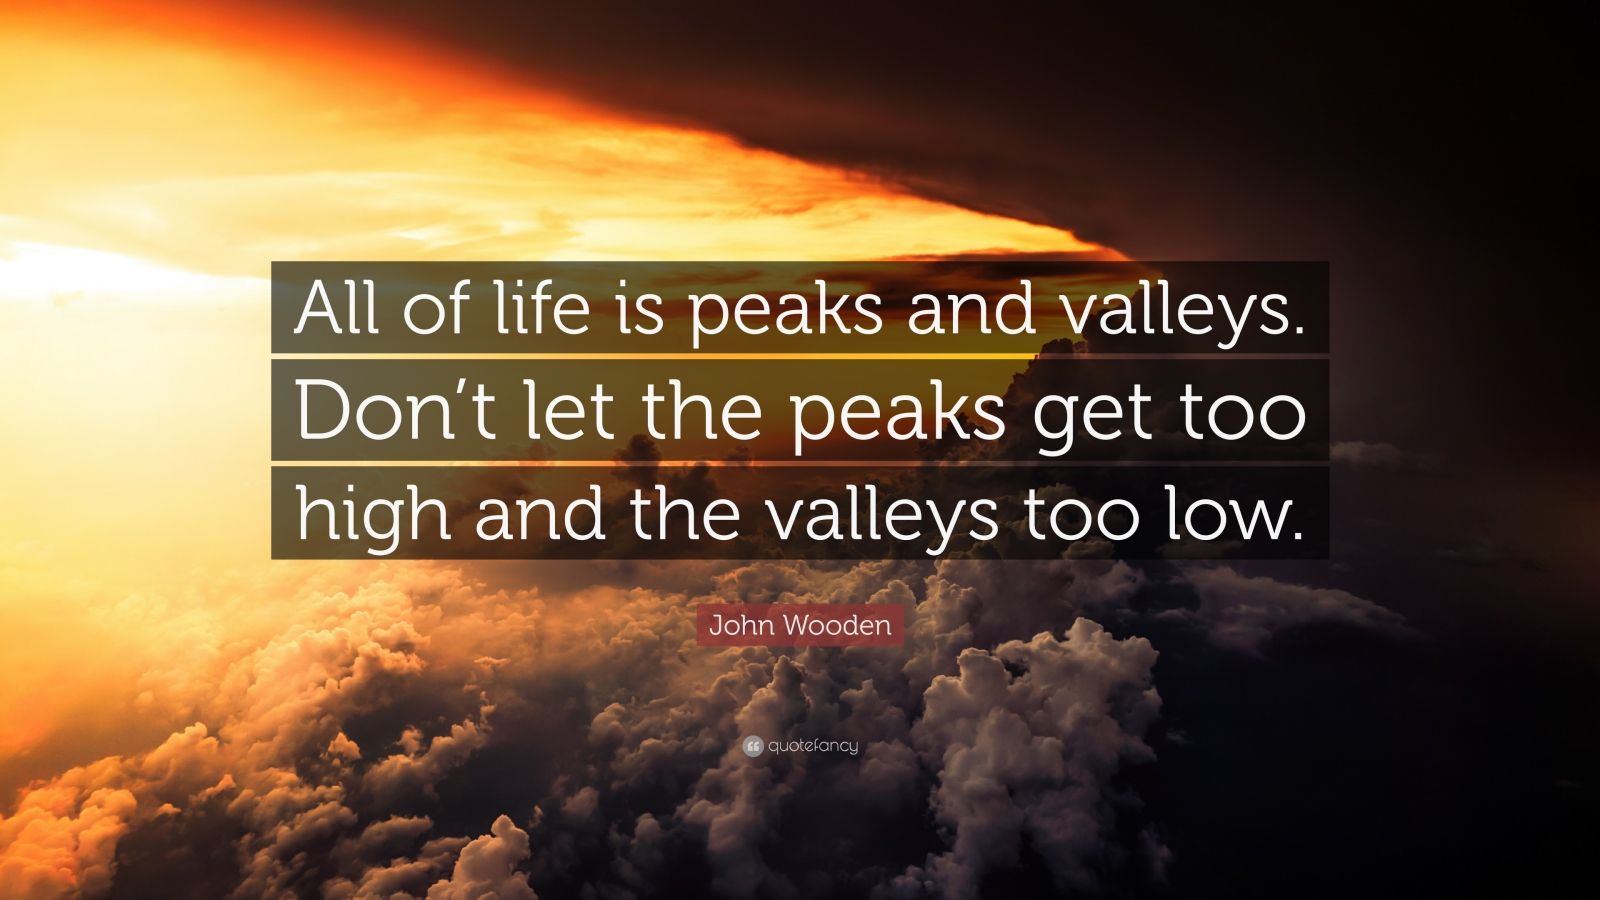 John Wooden Quote: “All of life is peaks and valleys. Don’t let the